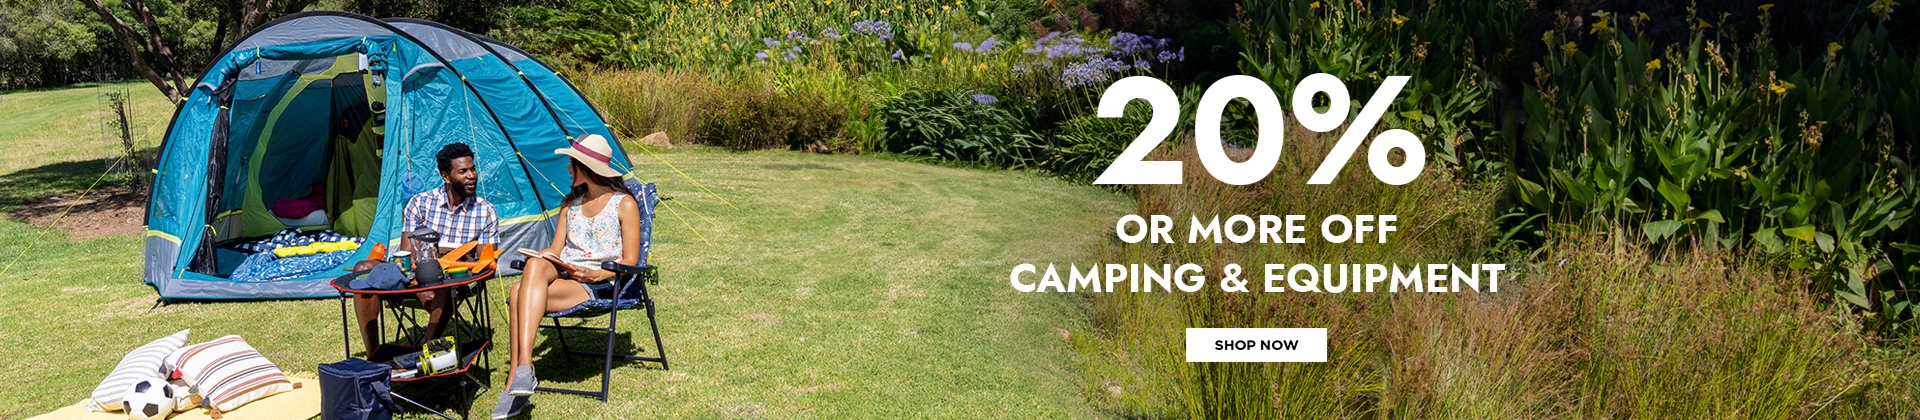 H1: 20% Off Camping & Equipment